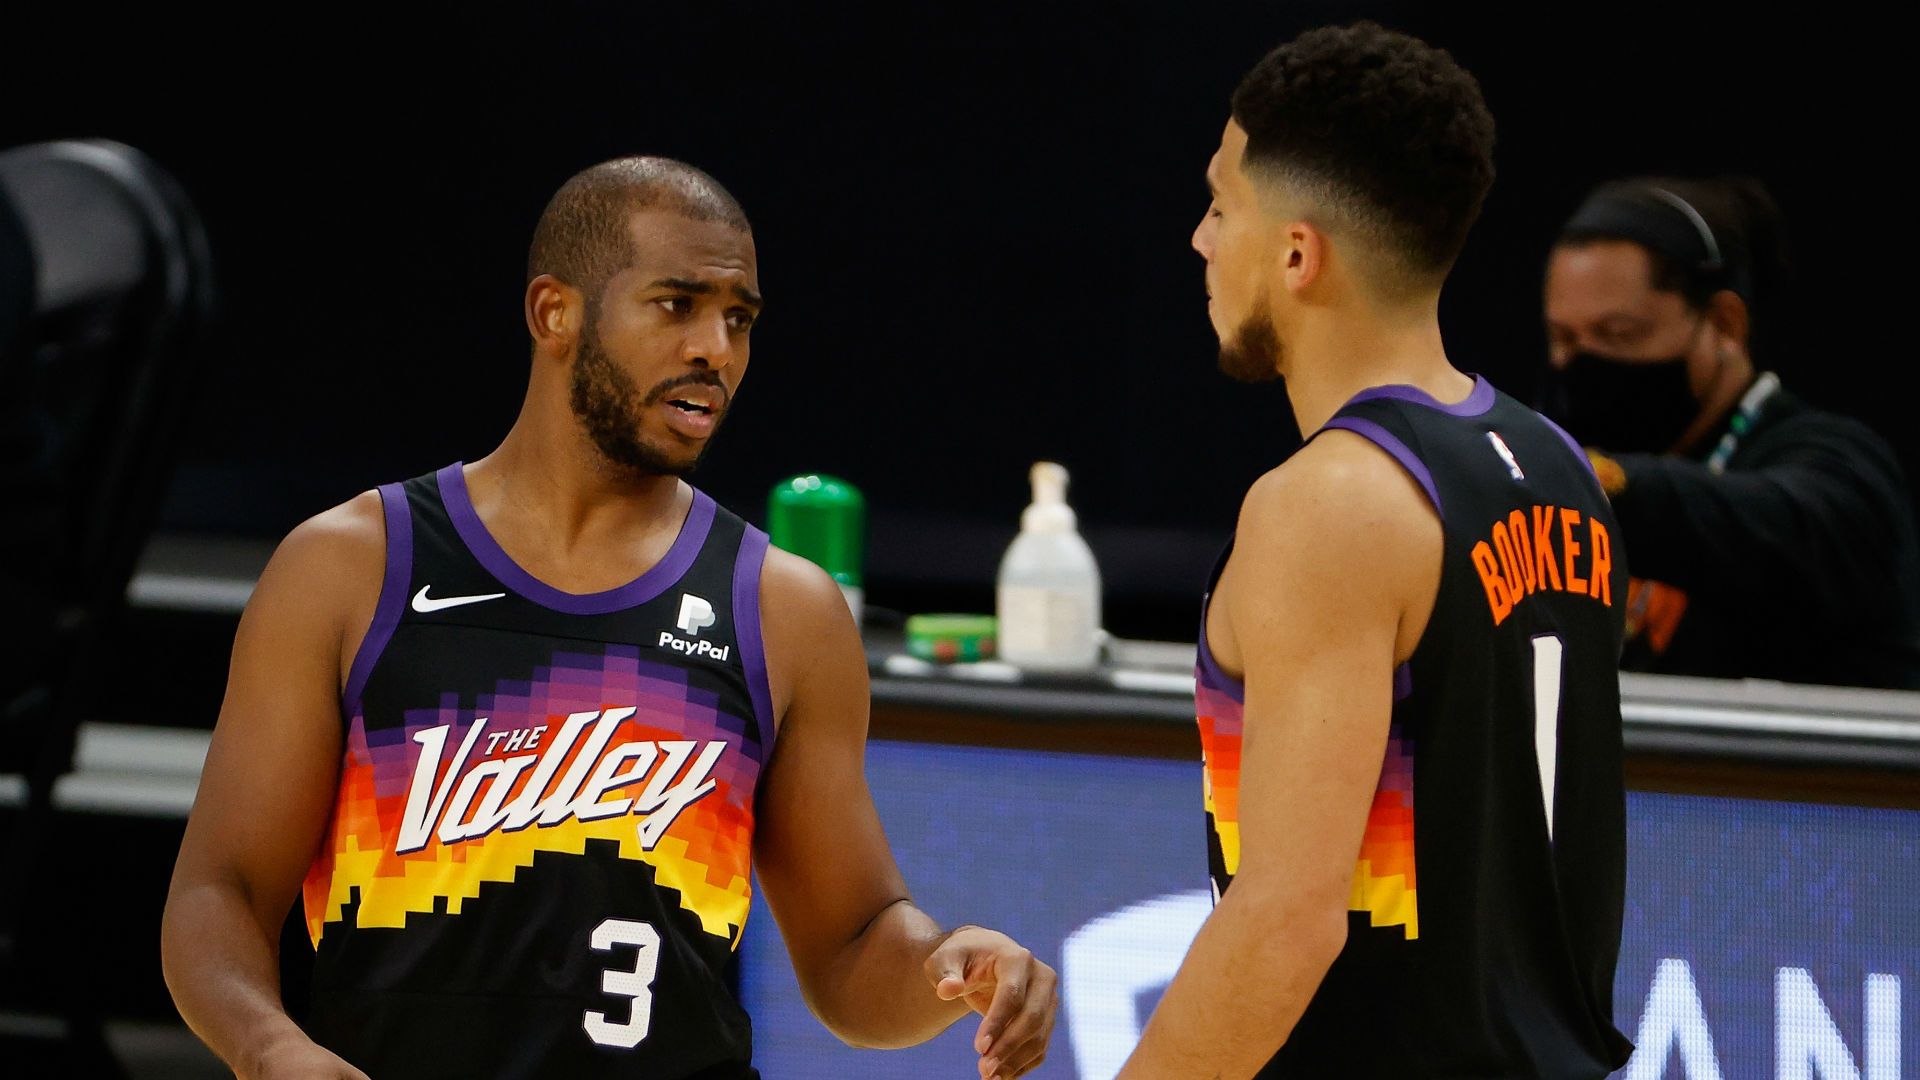 Chris Paul Speaks Out On Devin Booker's All Star Snub: “We Go As Booker Goes And We Know That”